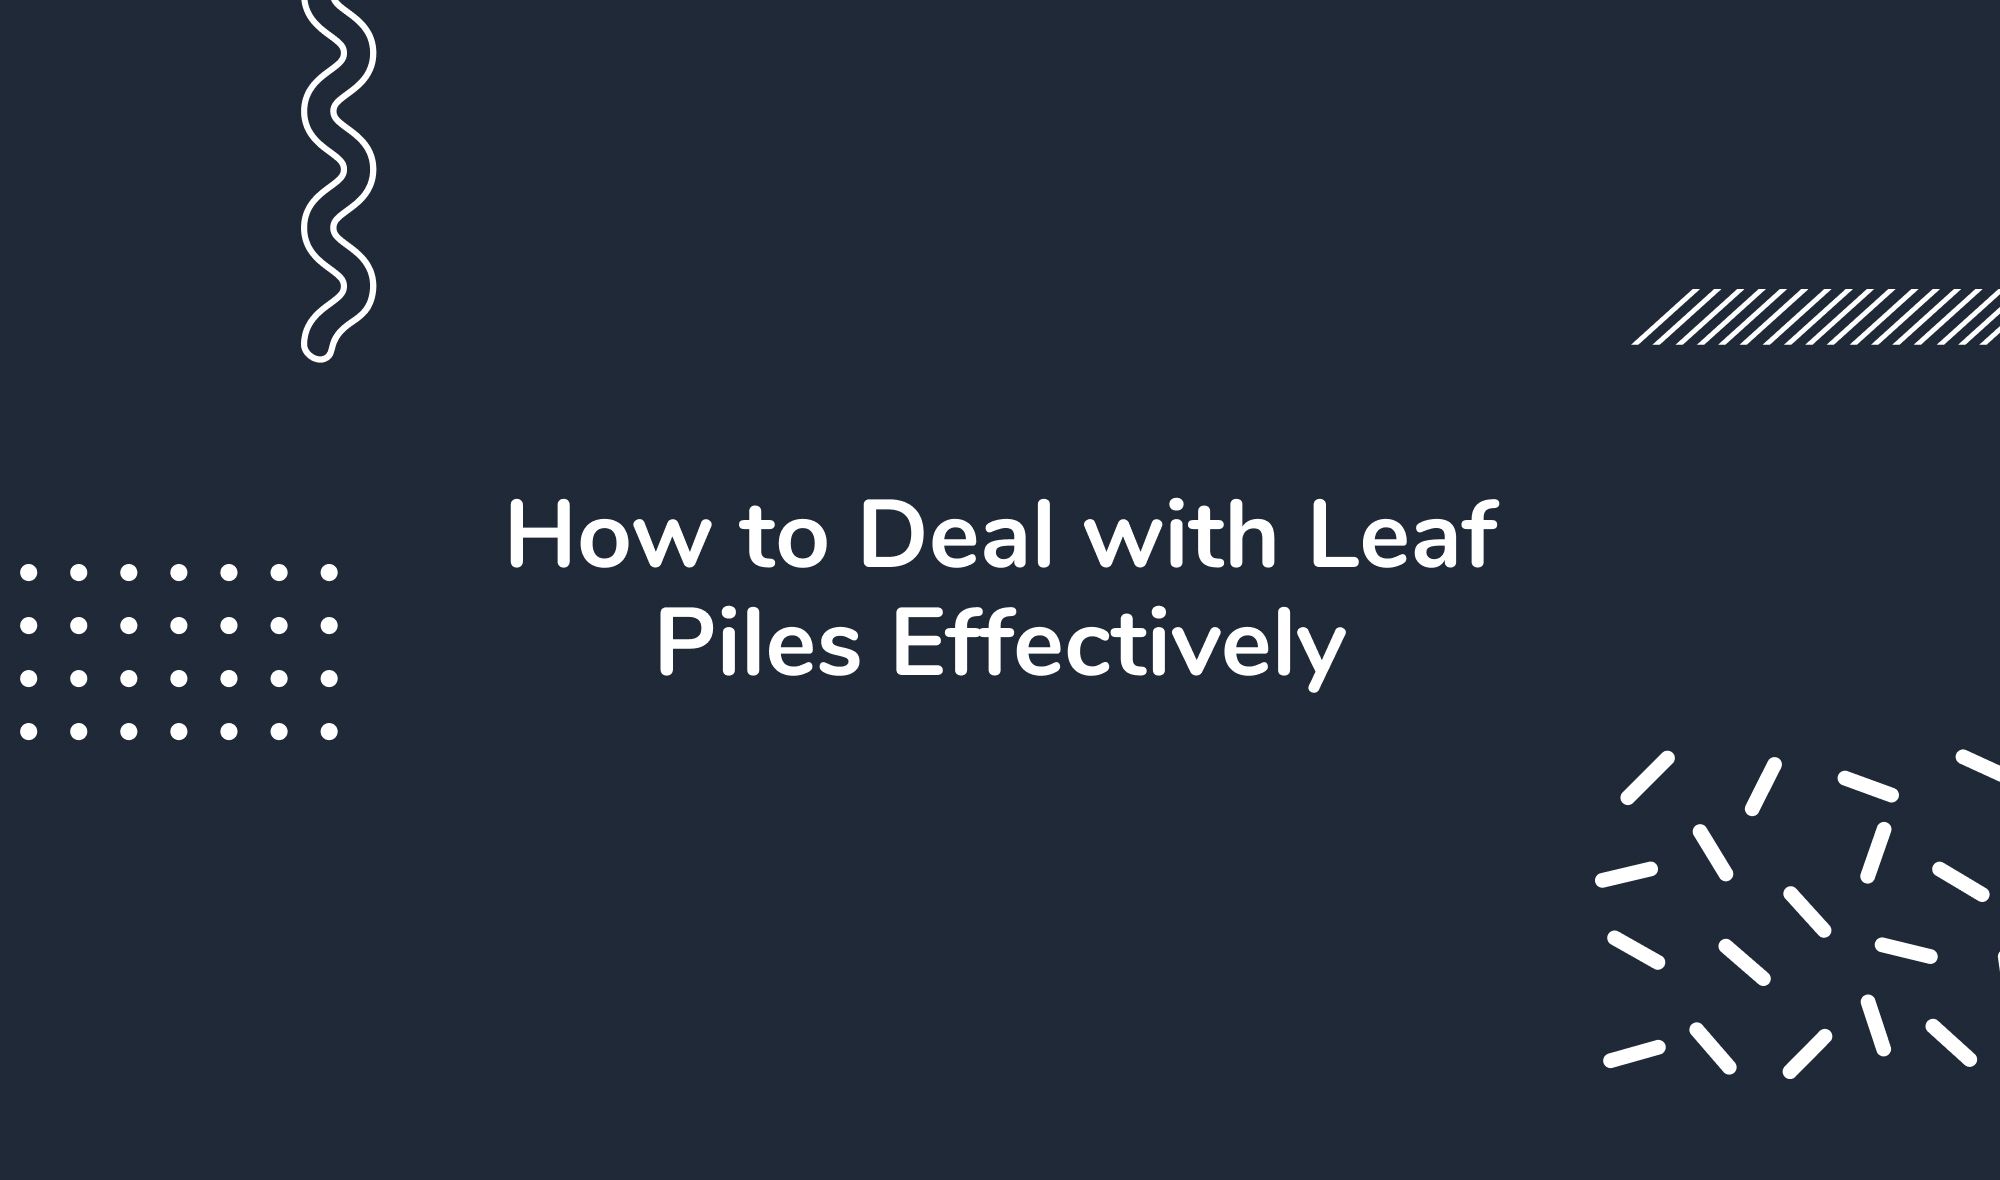 How to Deal with Leaf Piles Effectively